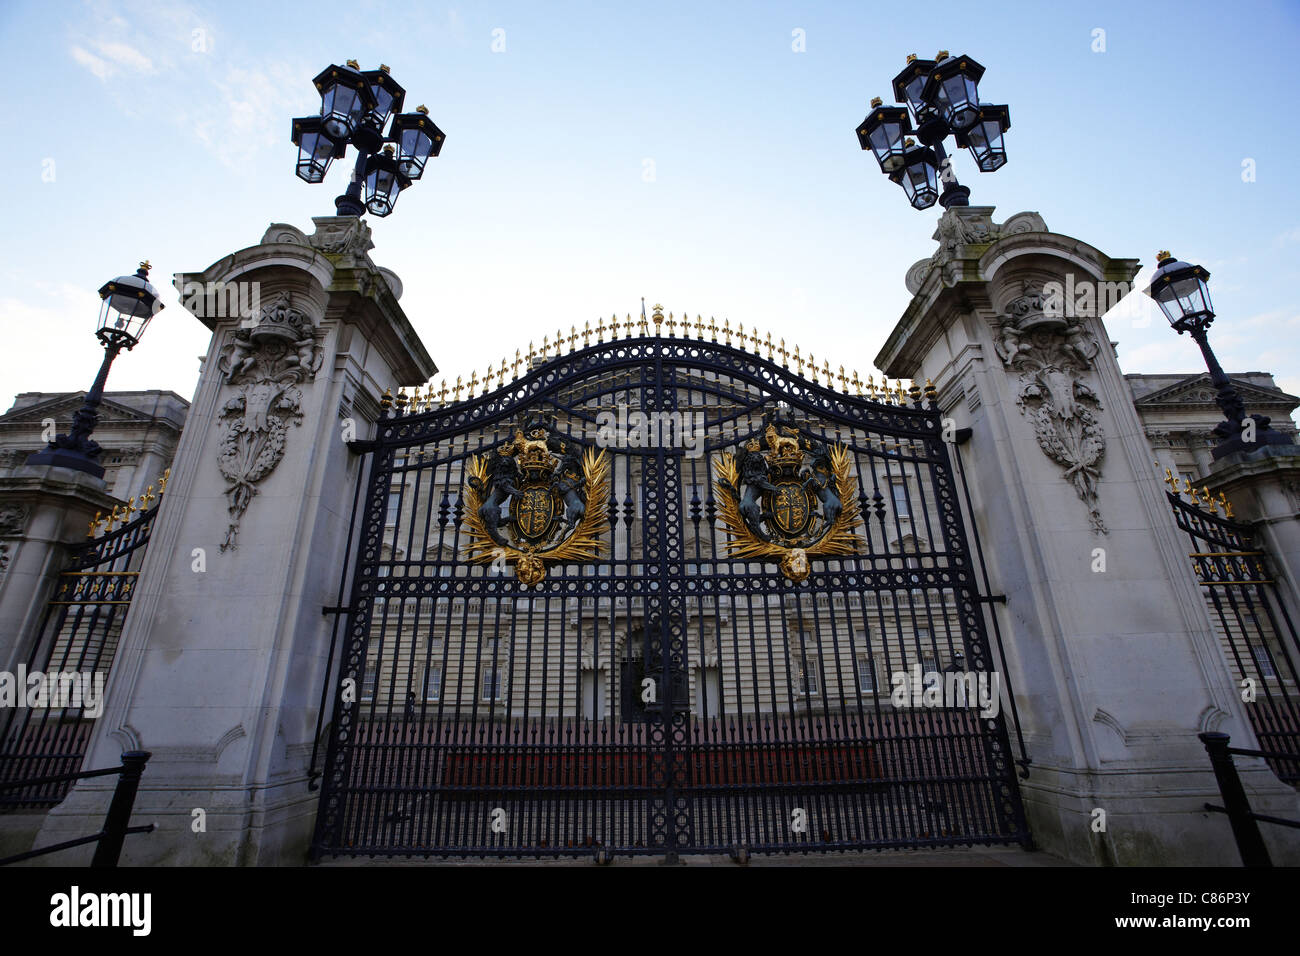 The central gate of the palace with the golden symbols of empire Stock Photo